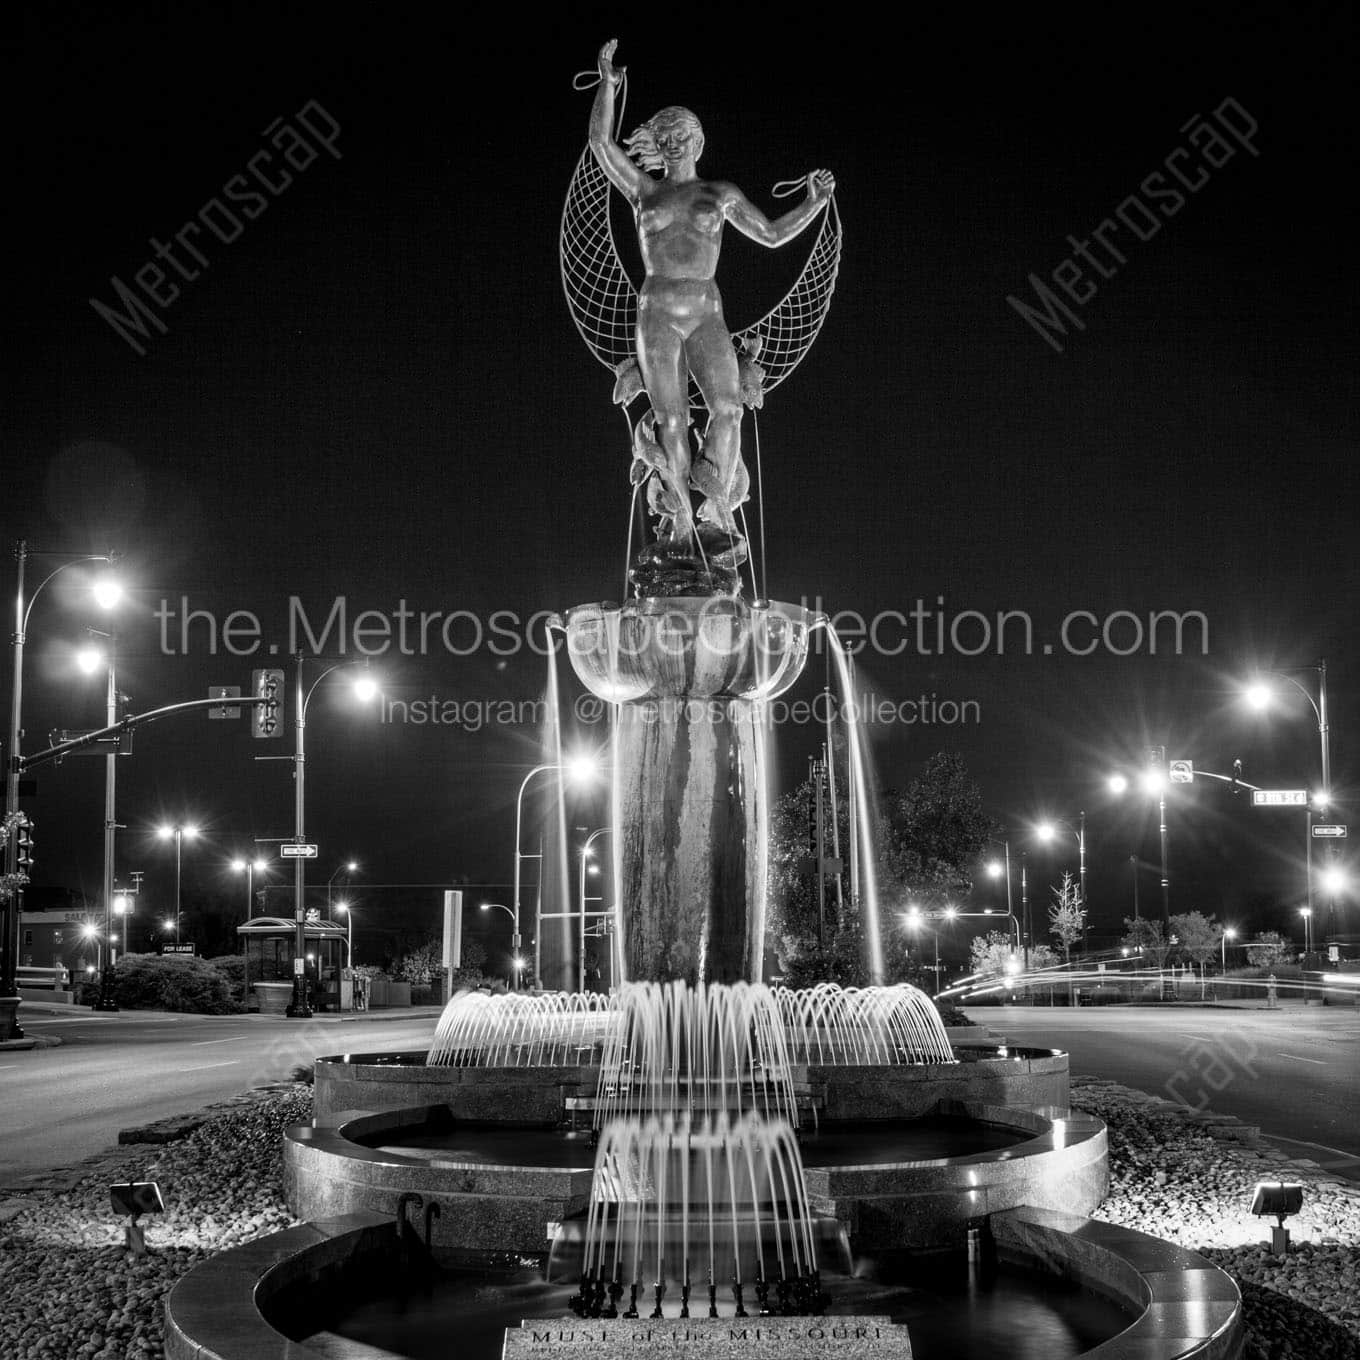 muse of the missouri fountain Black & White Office Art